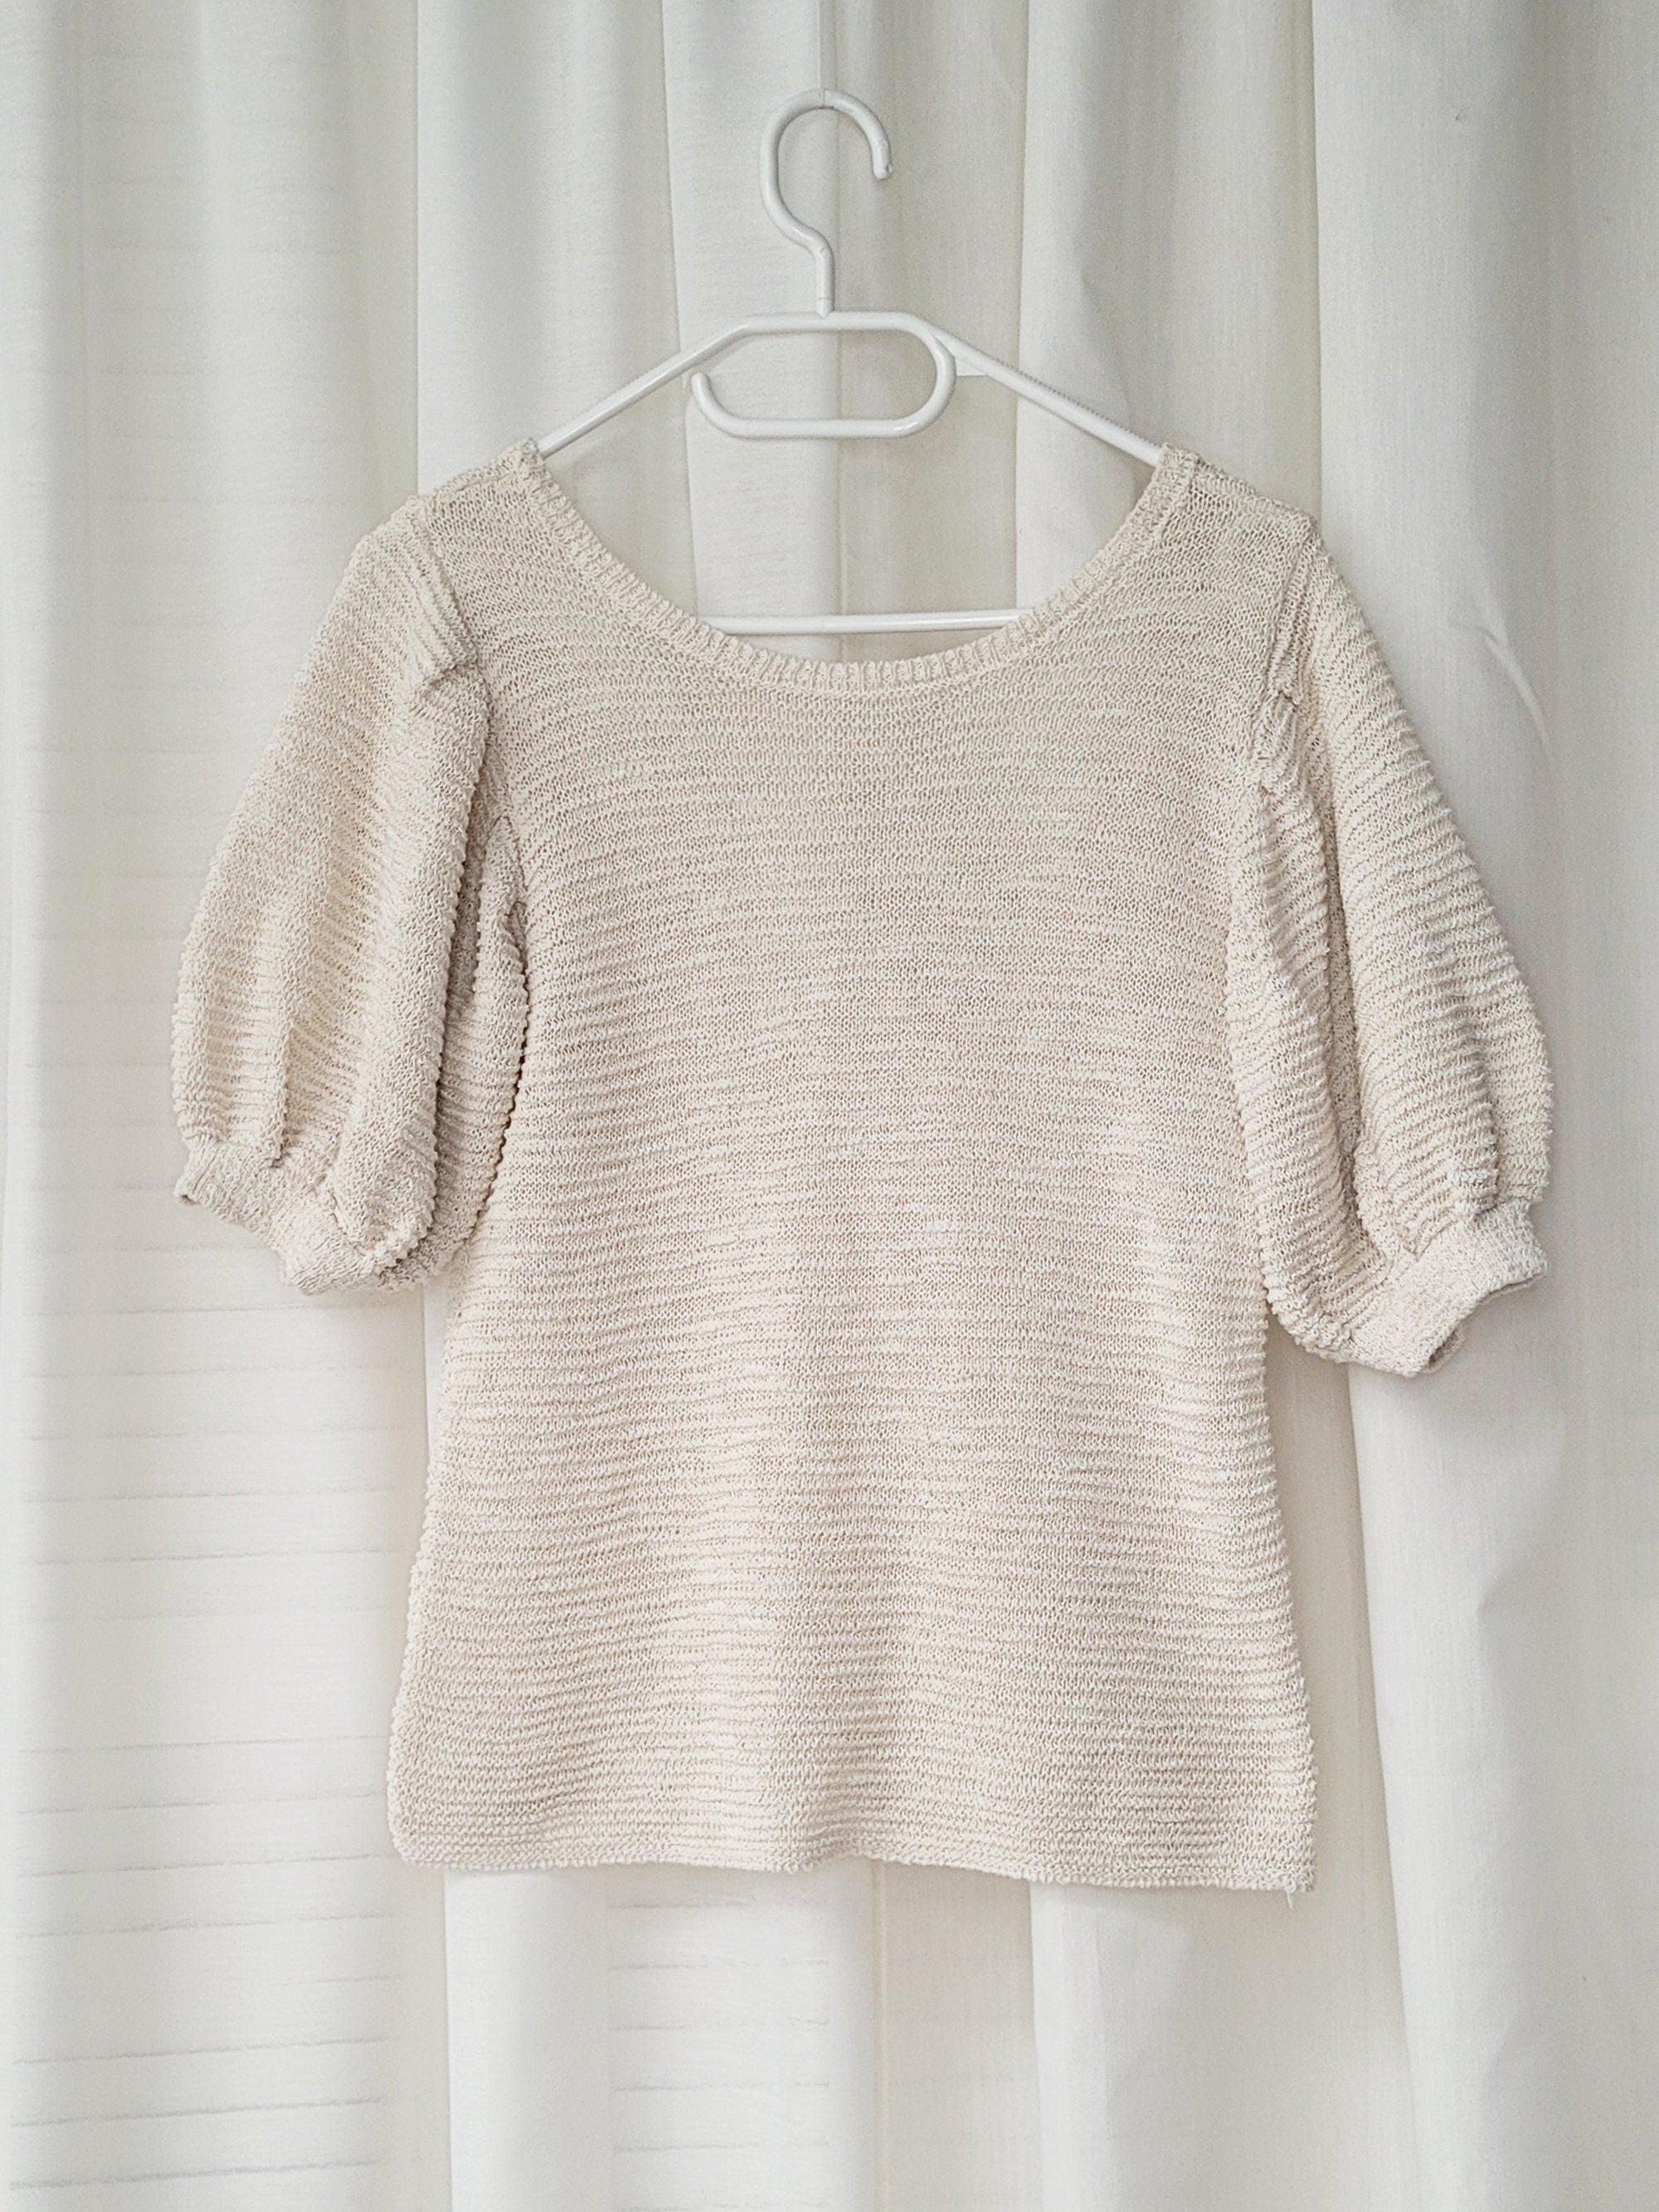 Vintage Y2K 00s cream knitted short puff sleeve top